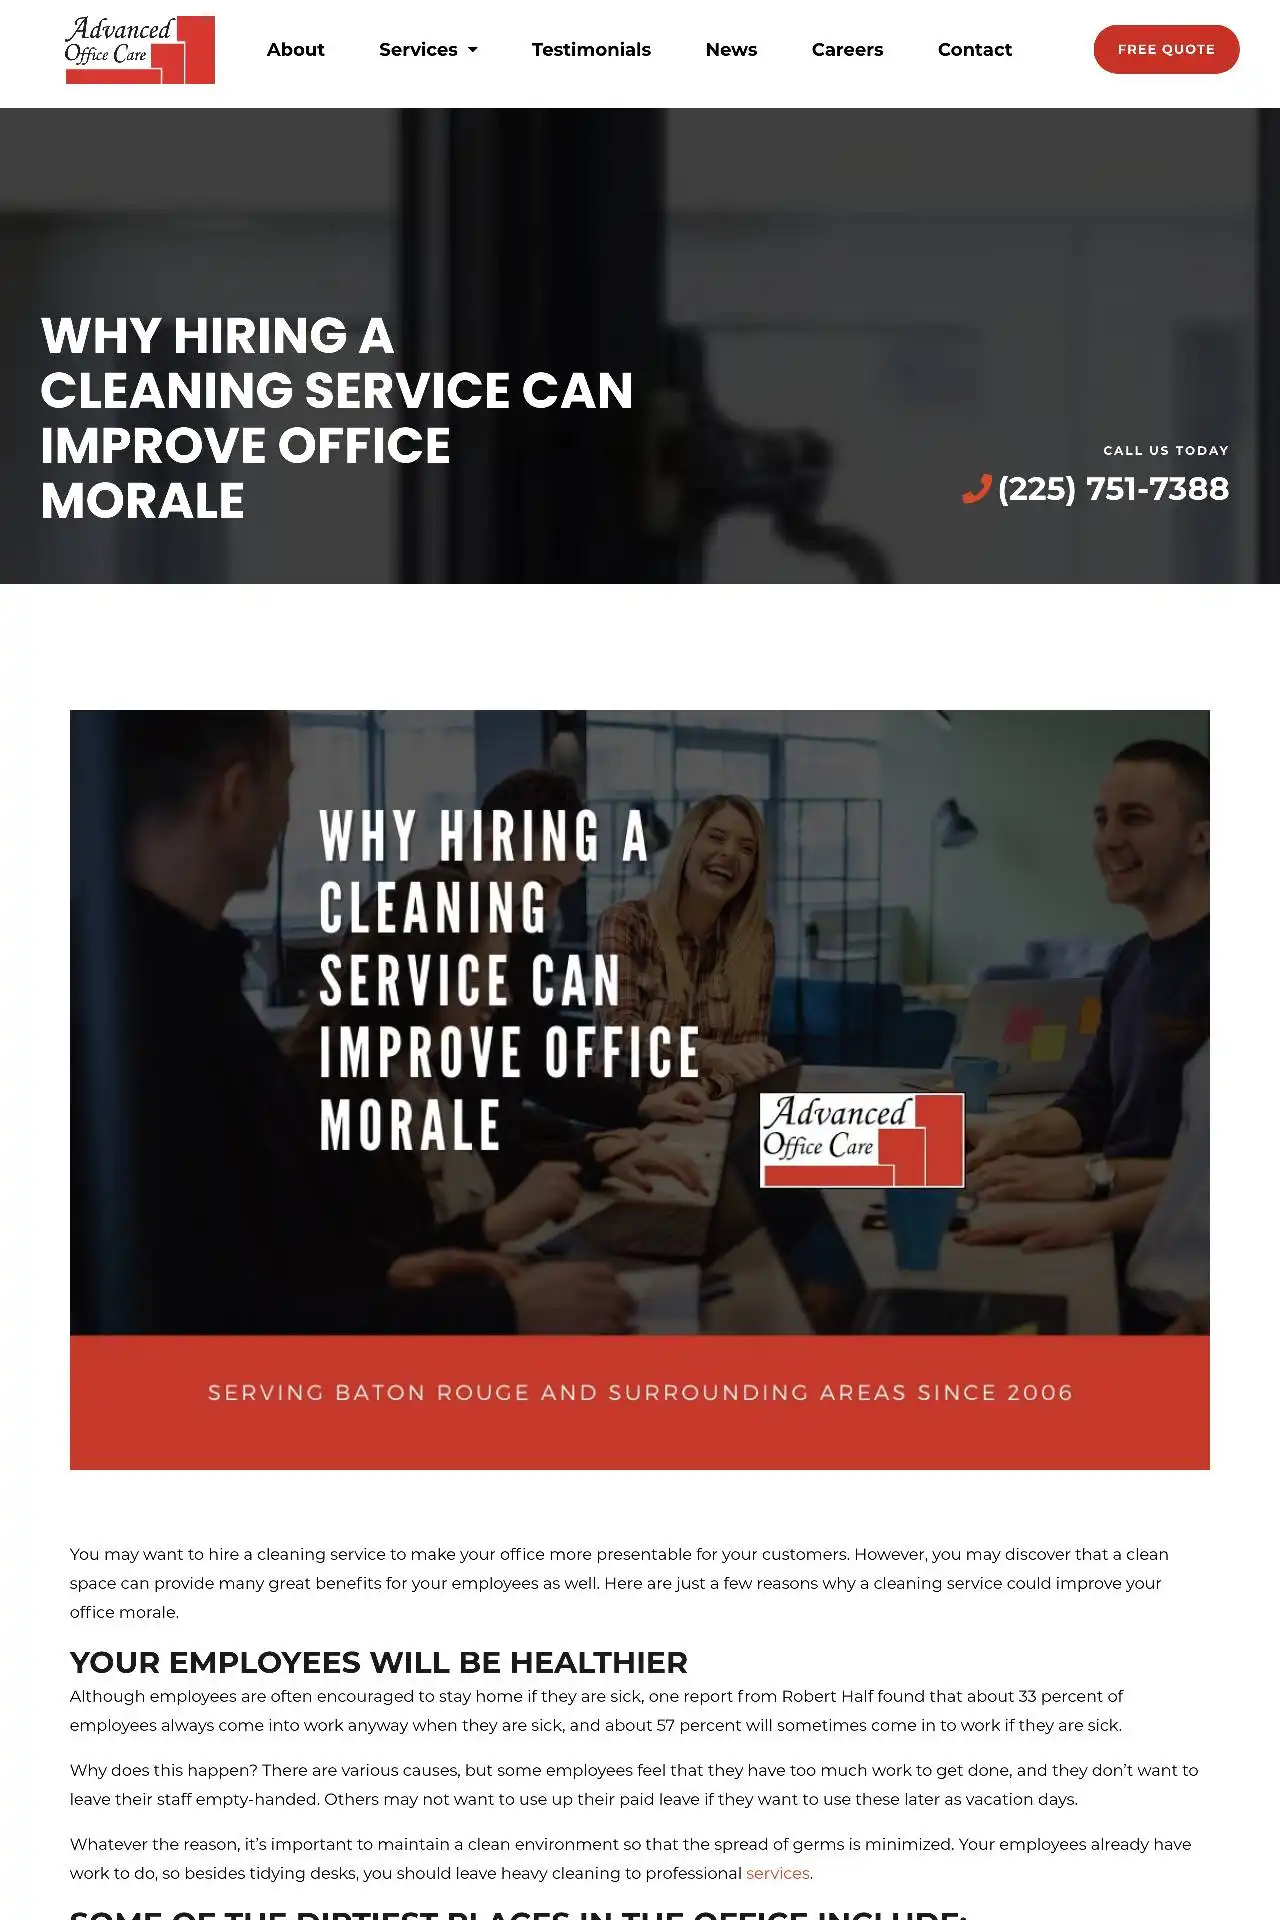 baton rouge cleaning company website design development https aocla.com cleaning why hiring a cleaning service can improve office morale